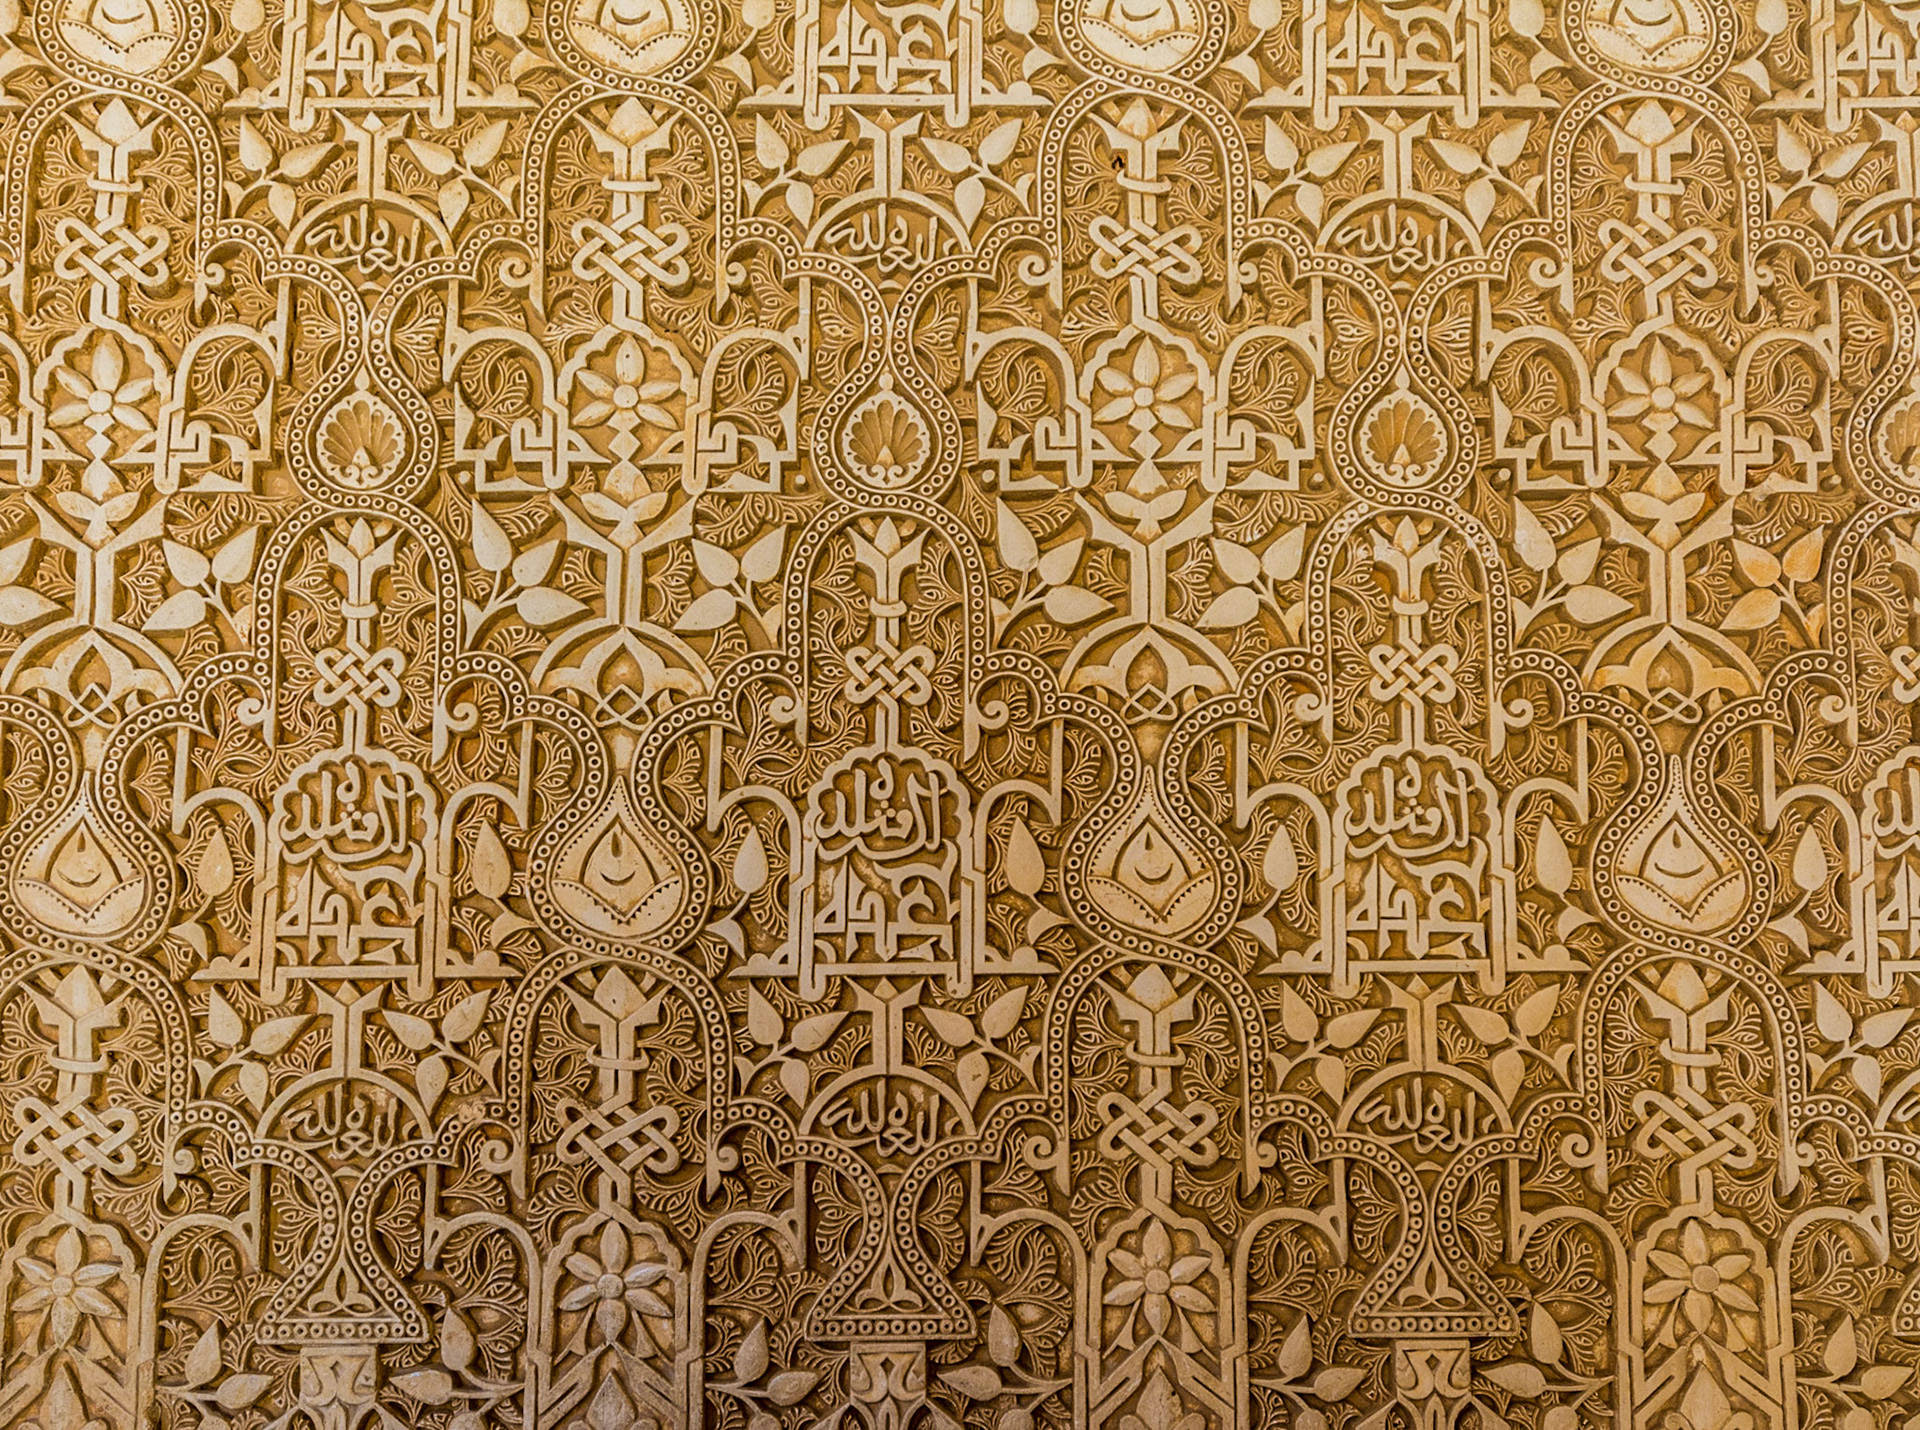 Majestic Detail of Alhambra's Ornate Wall Wallpaper